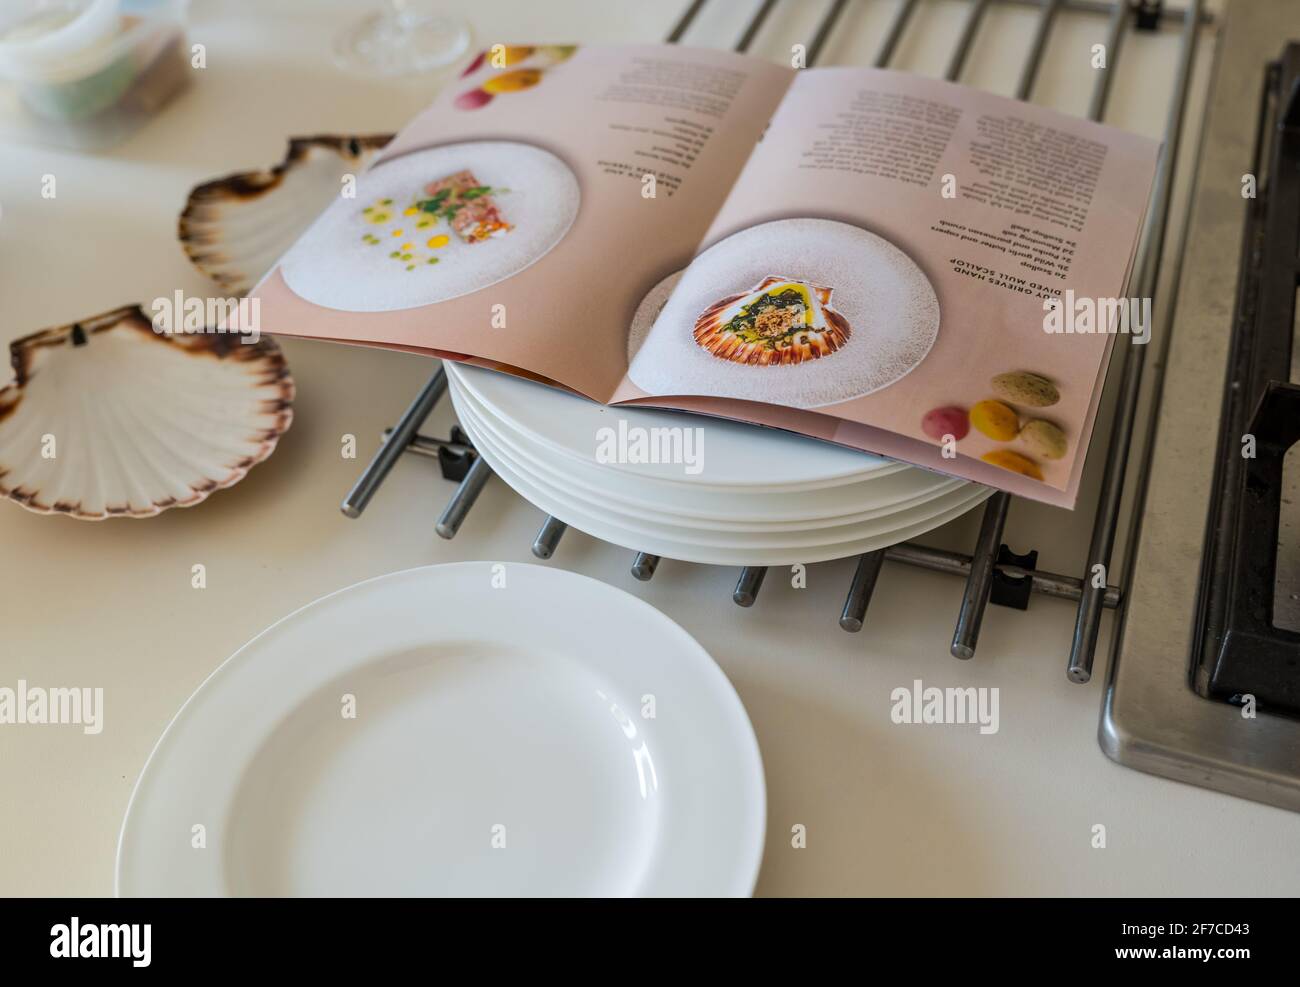 Fine dining tasting menu do-it-yourself at home instructions by chef Paul Wedgwood on kitchen counter with plates and scallop shells Stock Photo